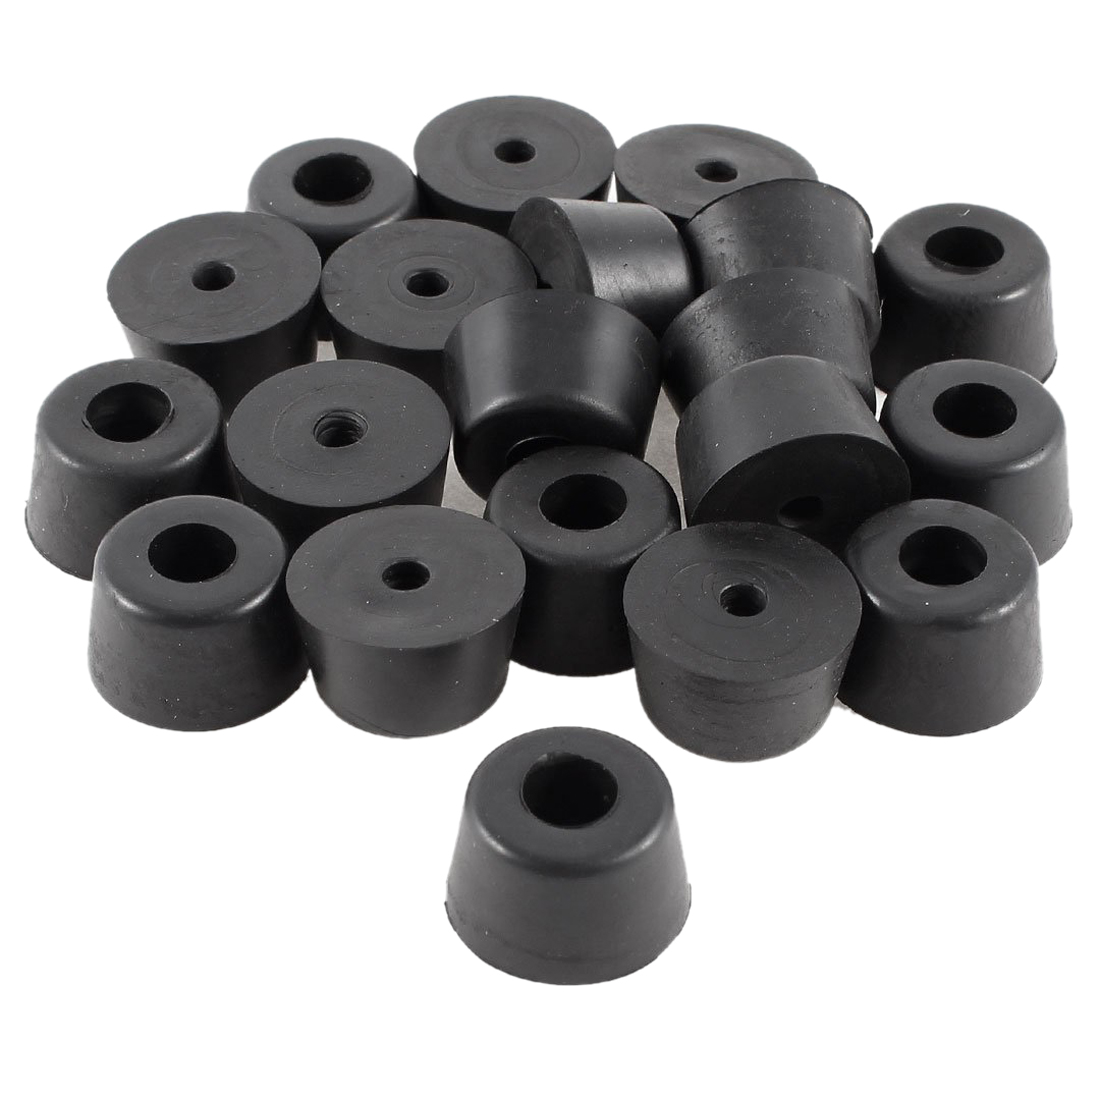 Hardware 40pcs Rubber Cap For Chair Leg Table O20 Mm O 25 Mm